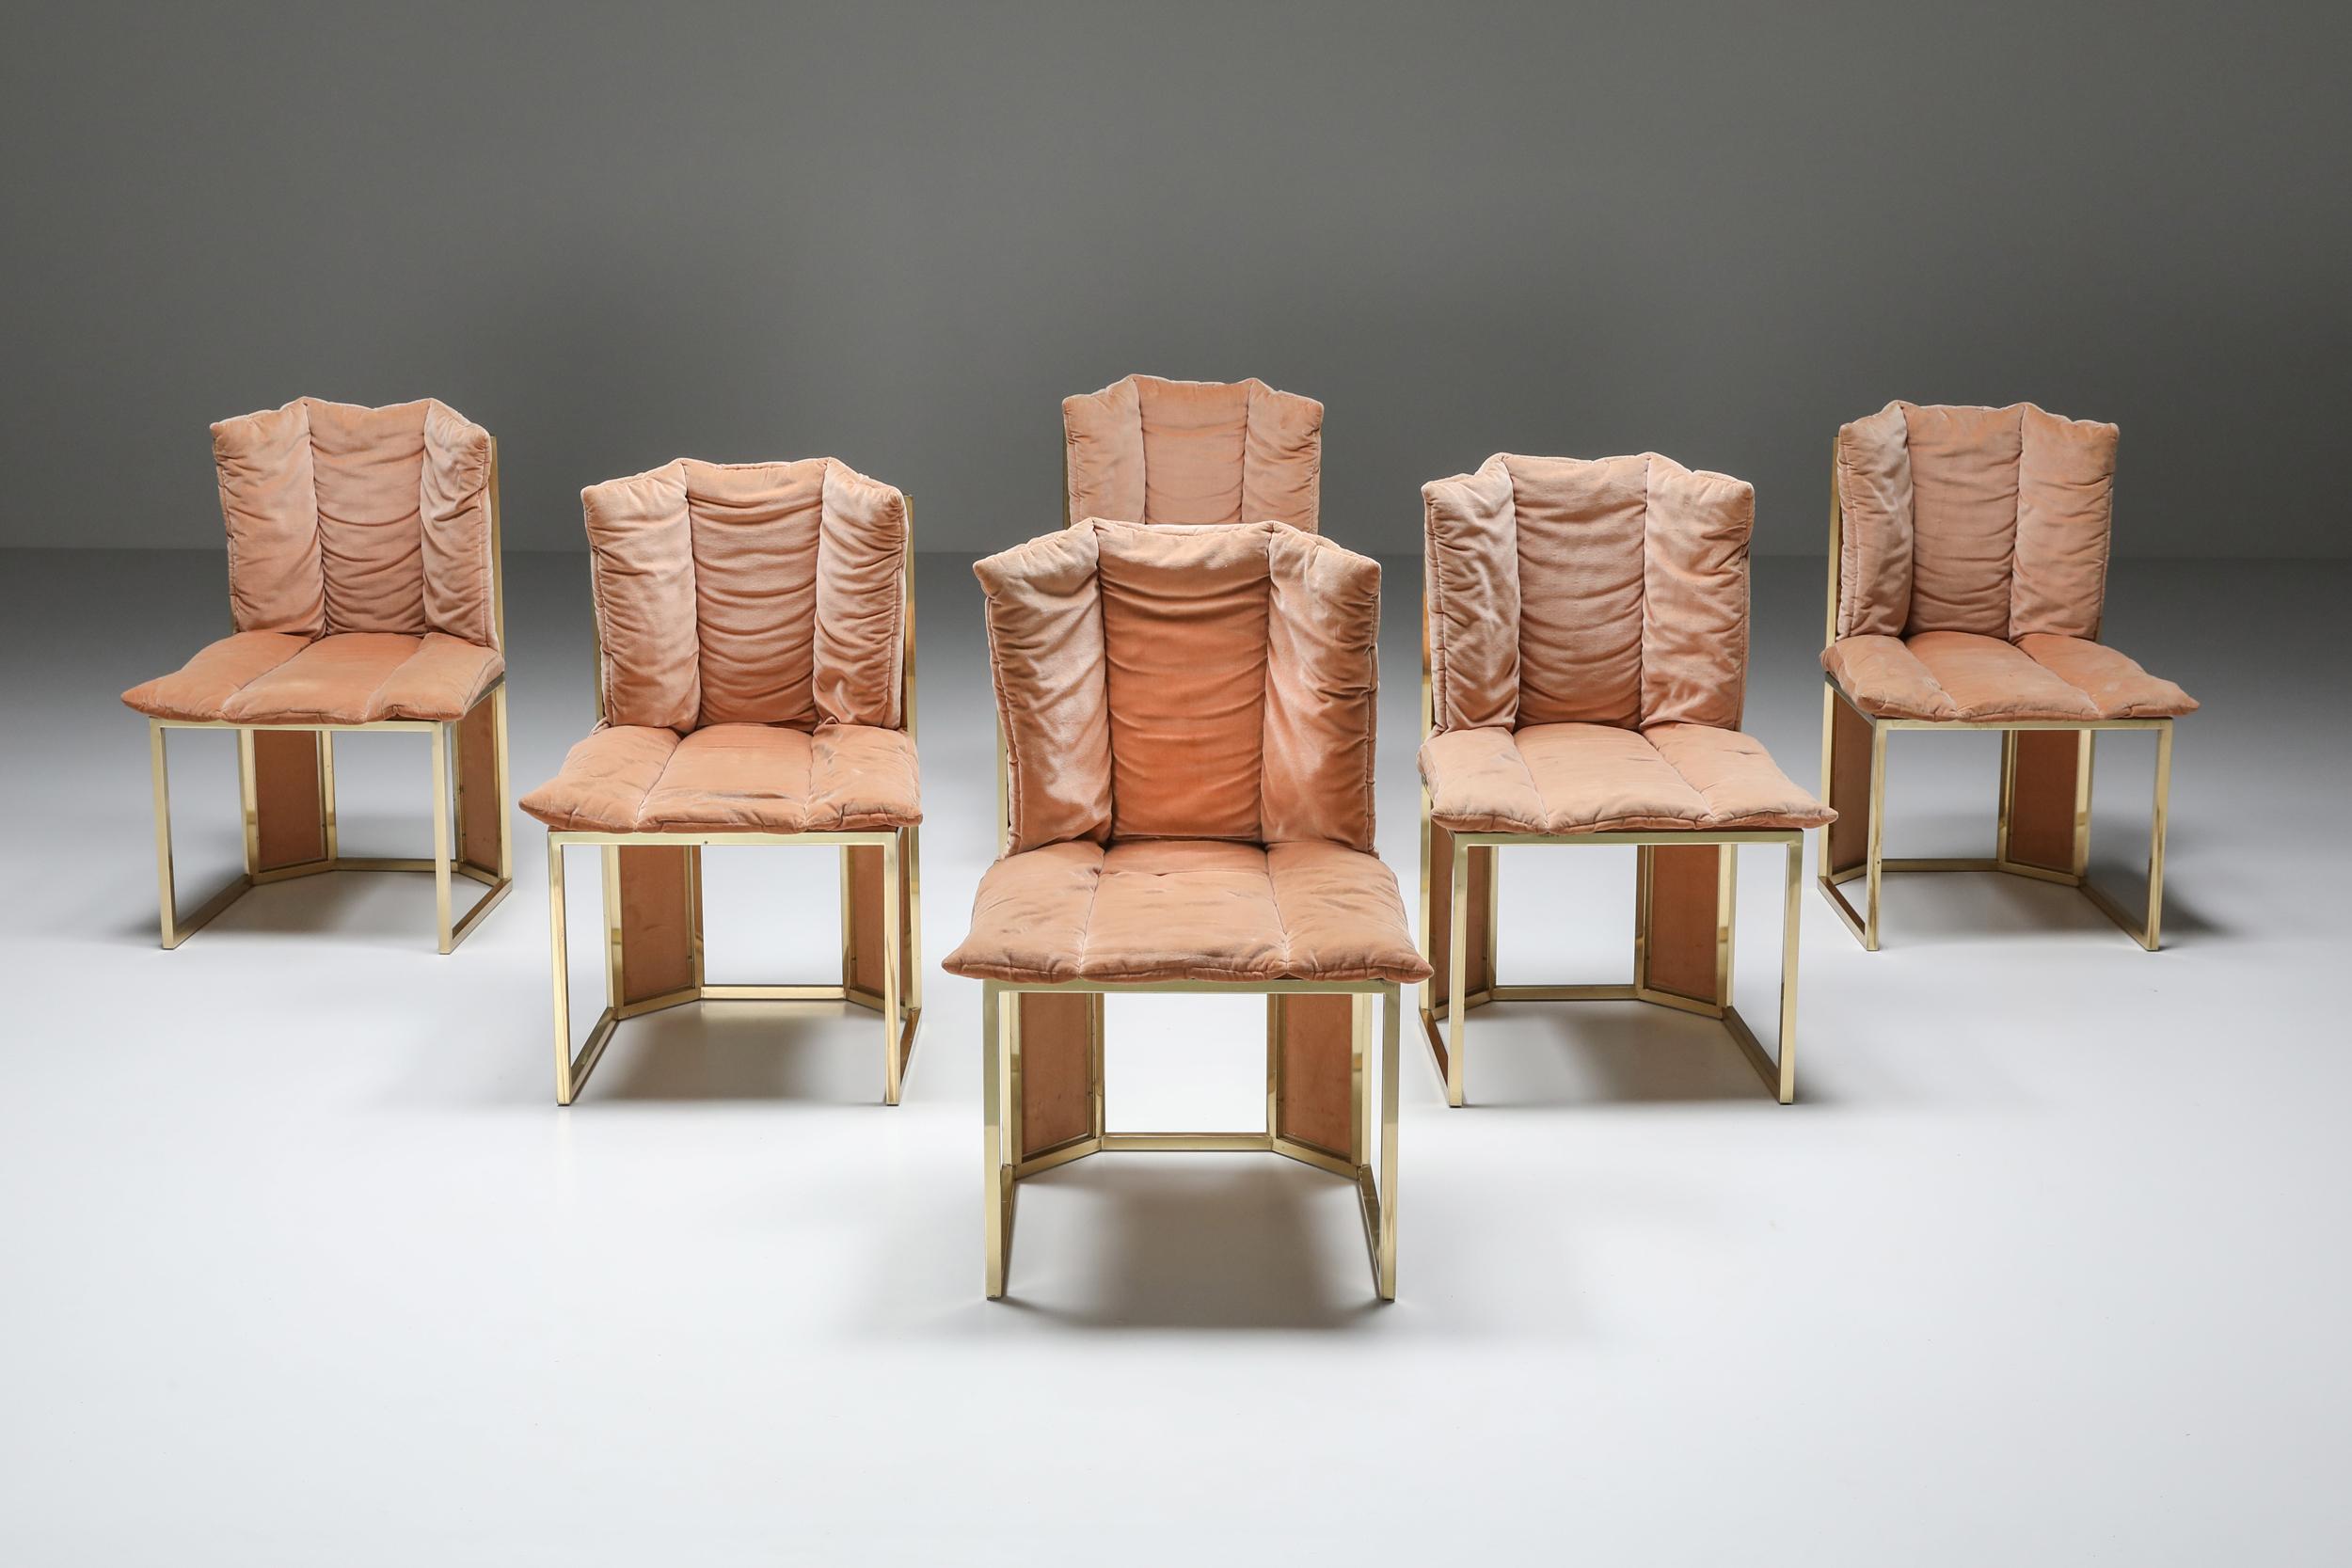 Italian Hollywood Regency Brass and Pink Dining Chairs, Maison Jansen, Dimore Studio